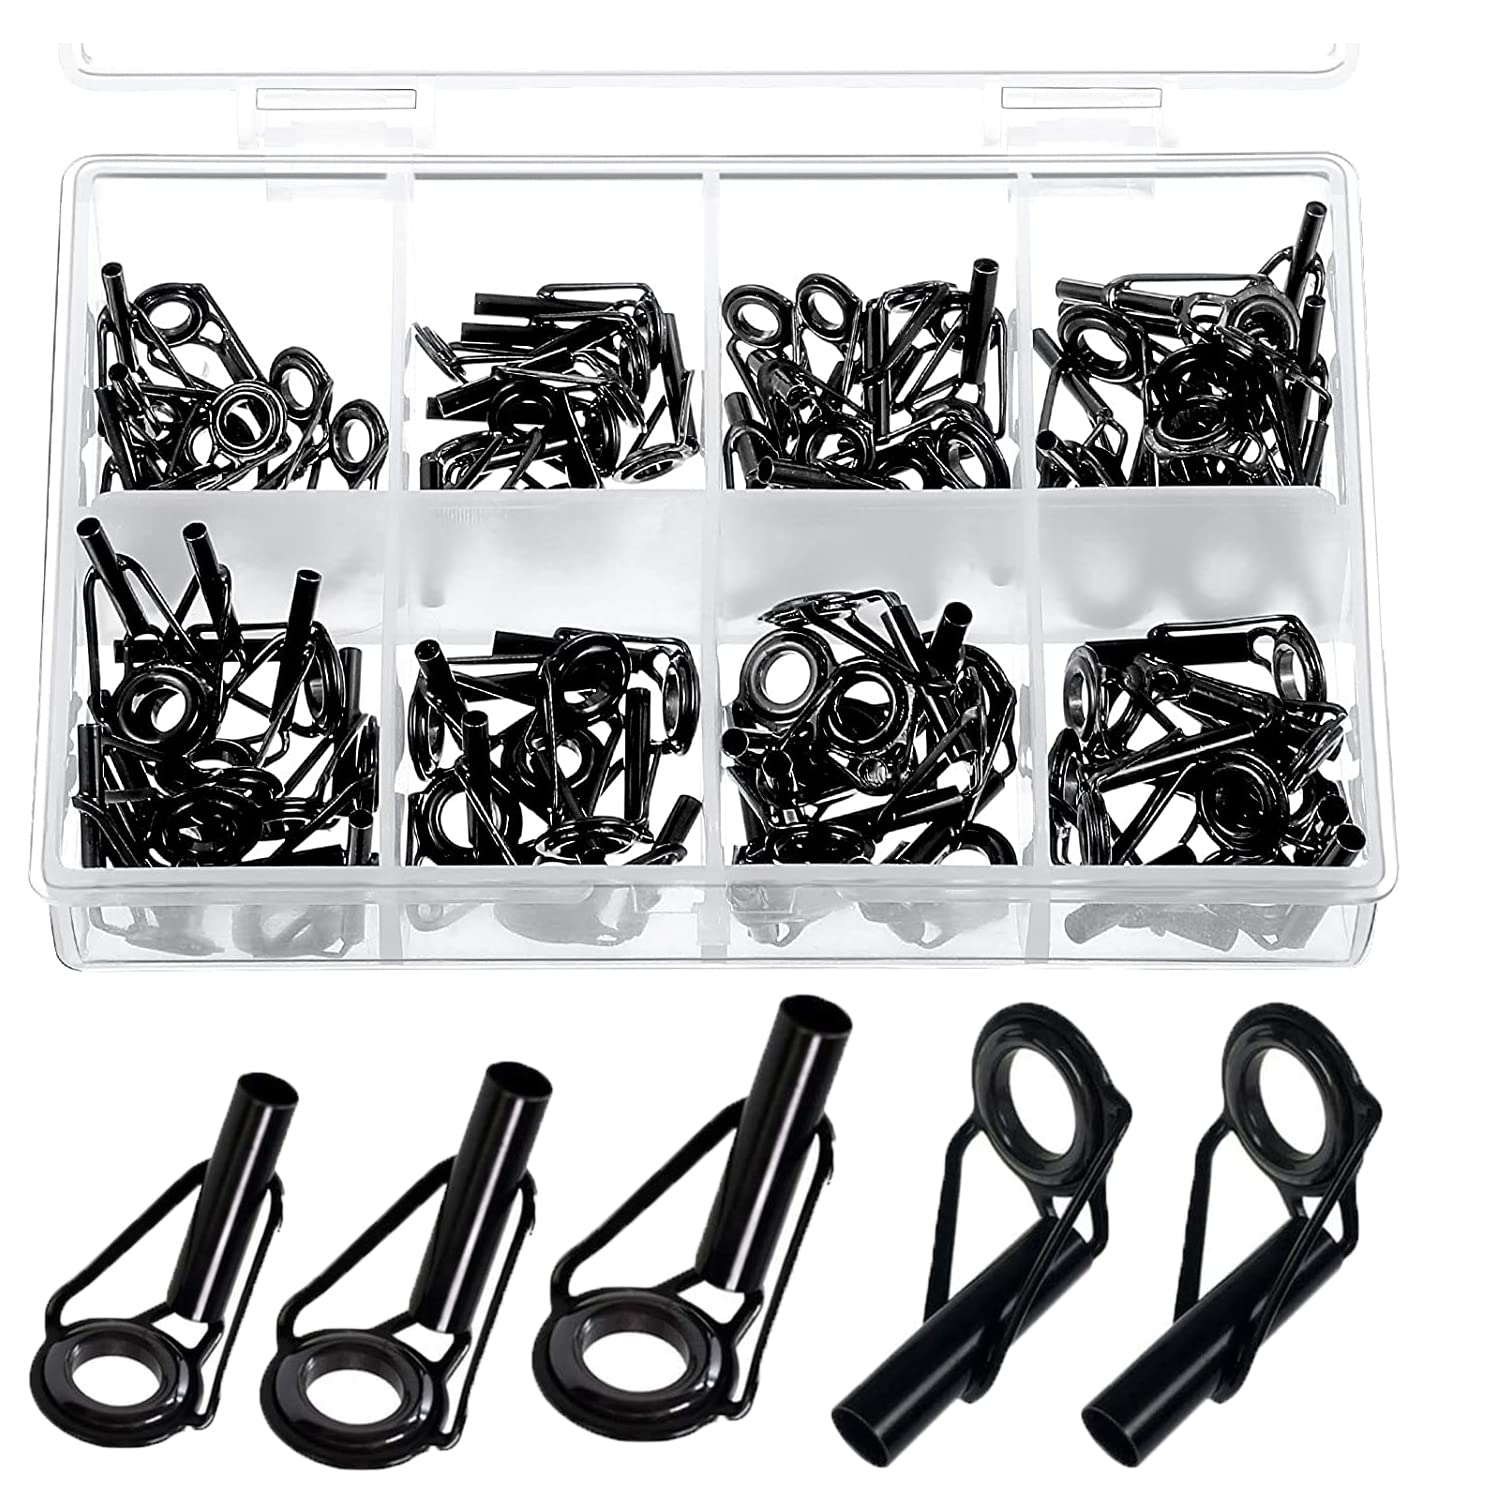 50 Pieces Fishing Rod Tip Repair Kit Rod Tips Kit Replacement for  Freshwater Saltwater Rods Stainless Steel Ceramic Ring Guide Replacement Kit  50 Pcs